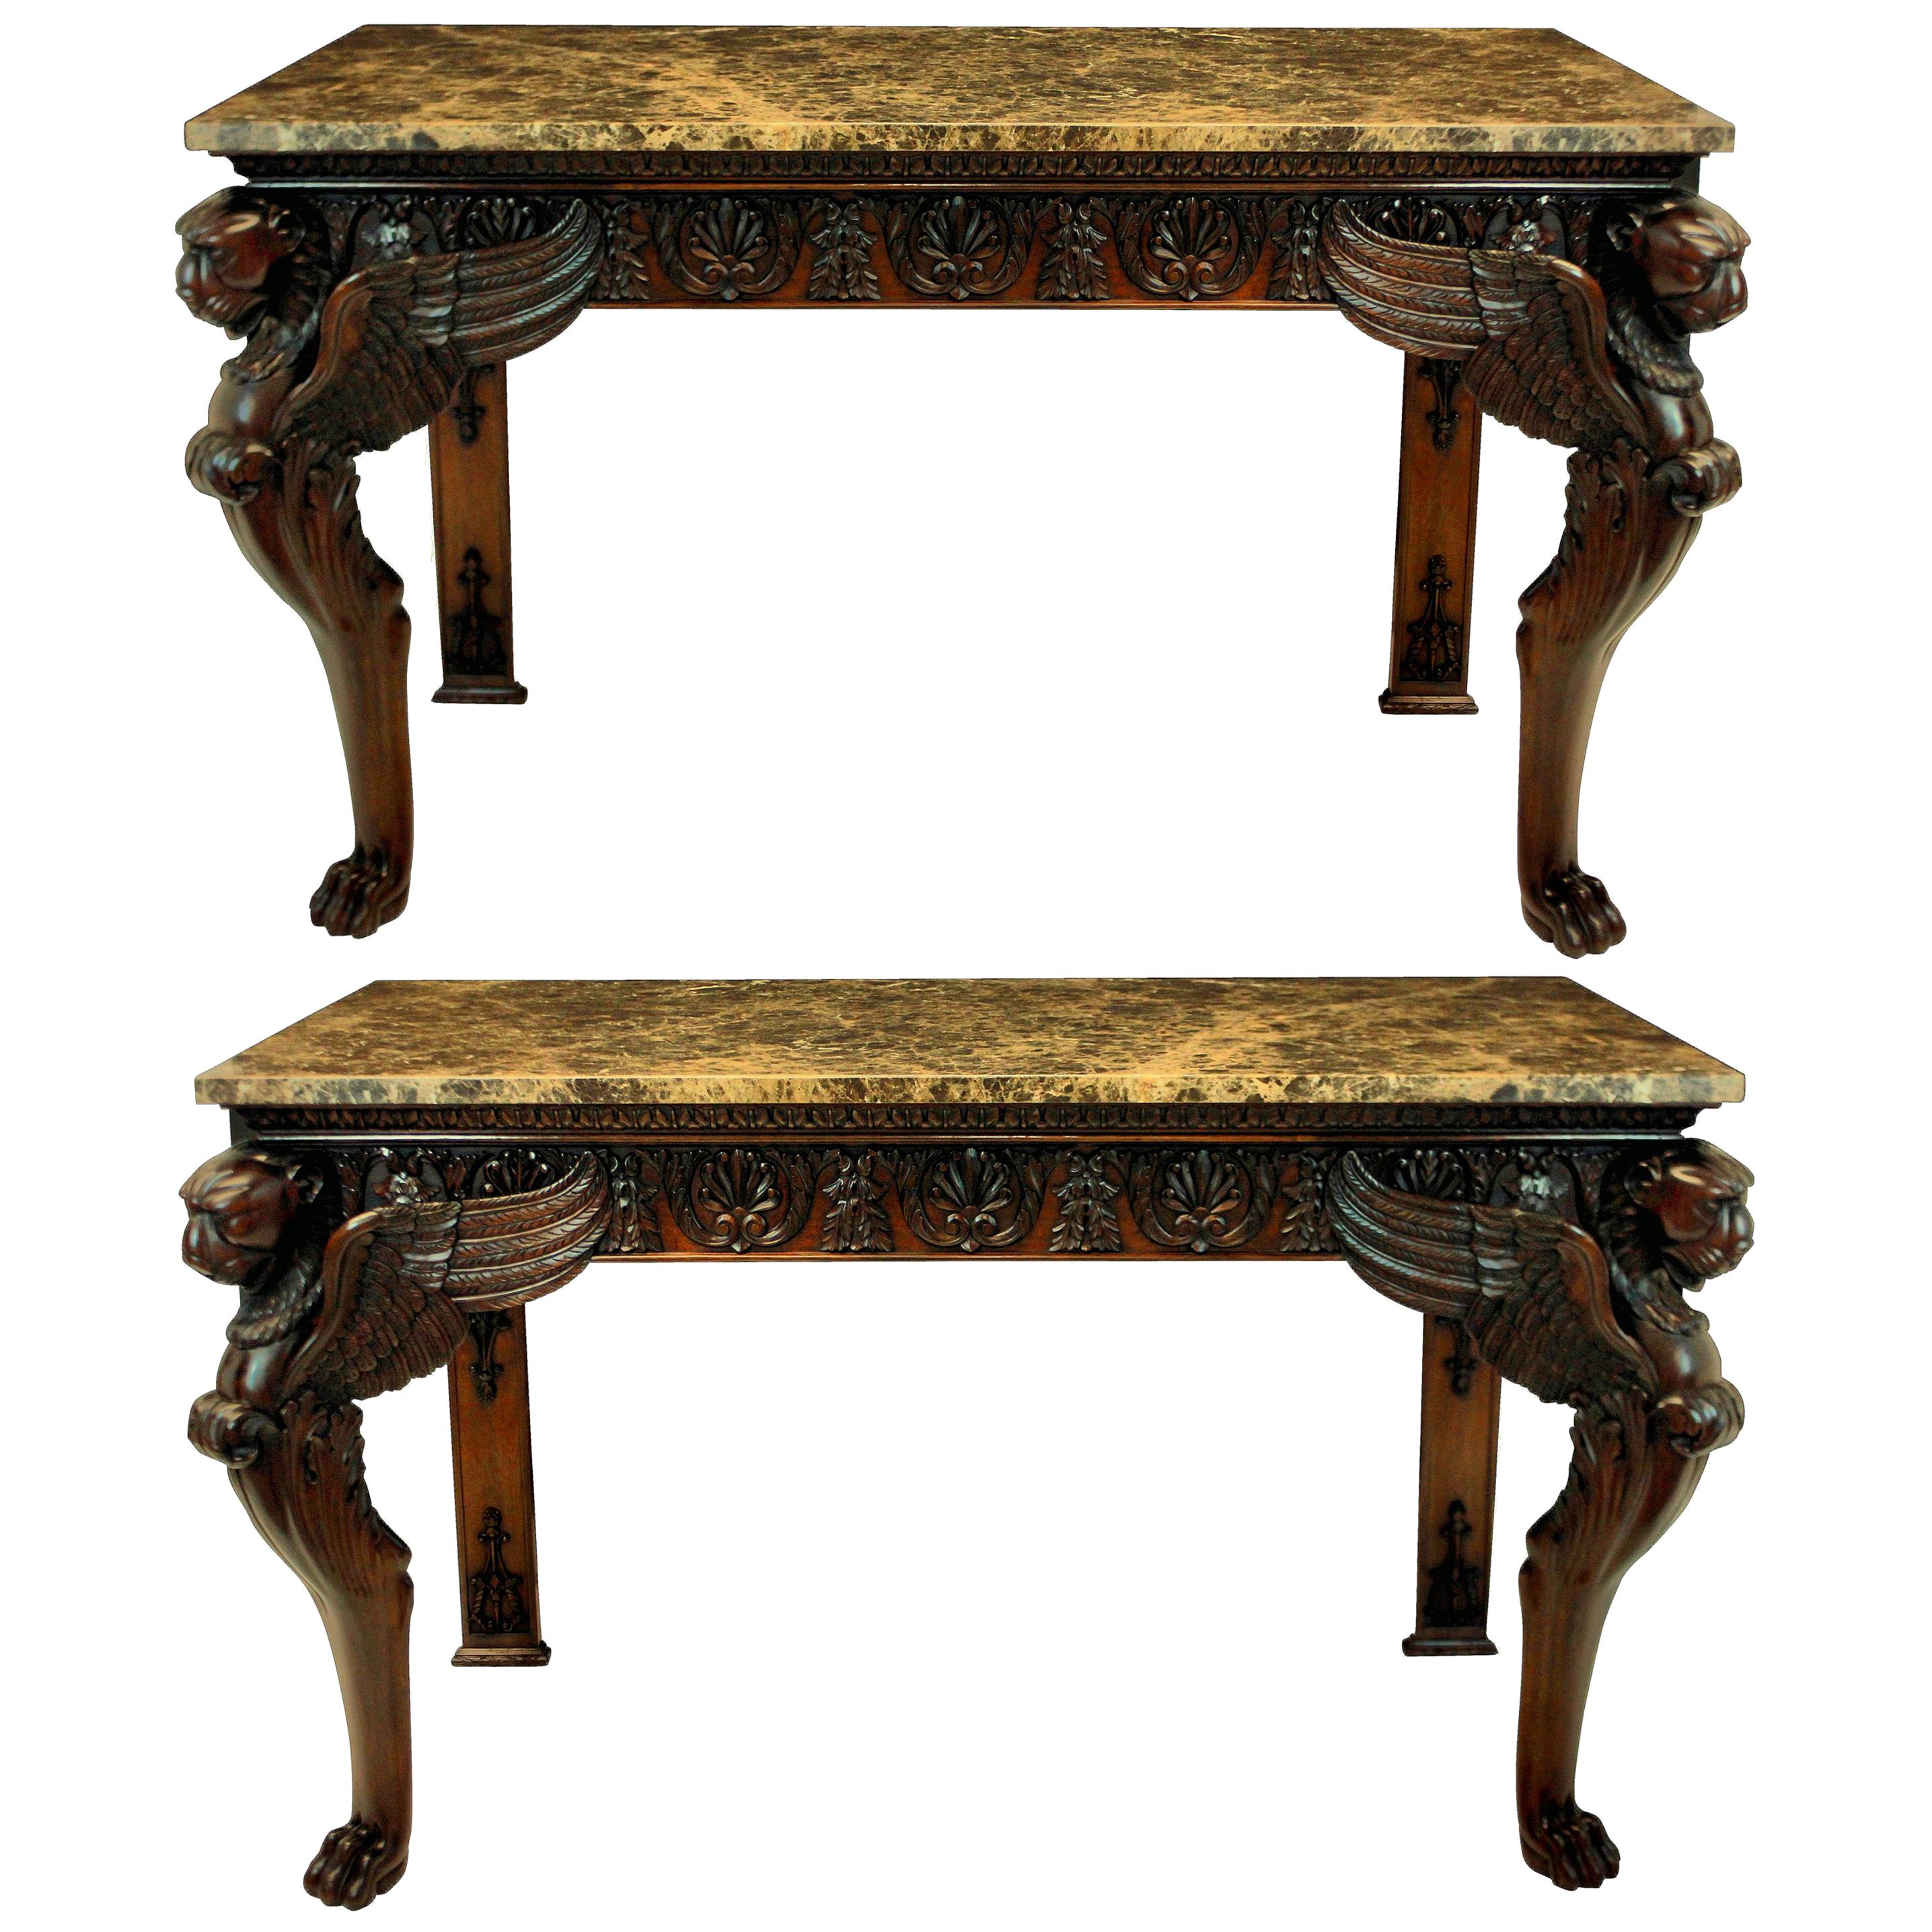 Pair of Large Carved Mahogany Adam Revival Console Tables